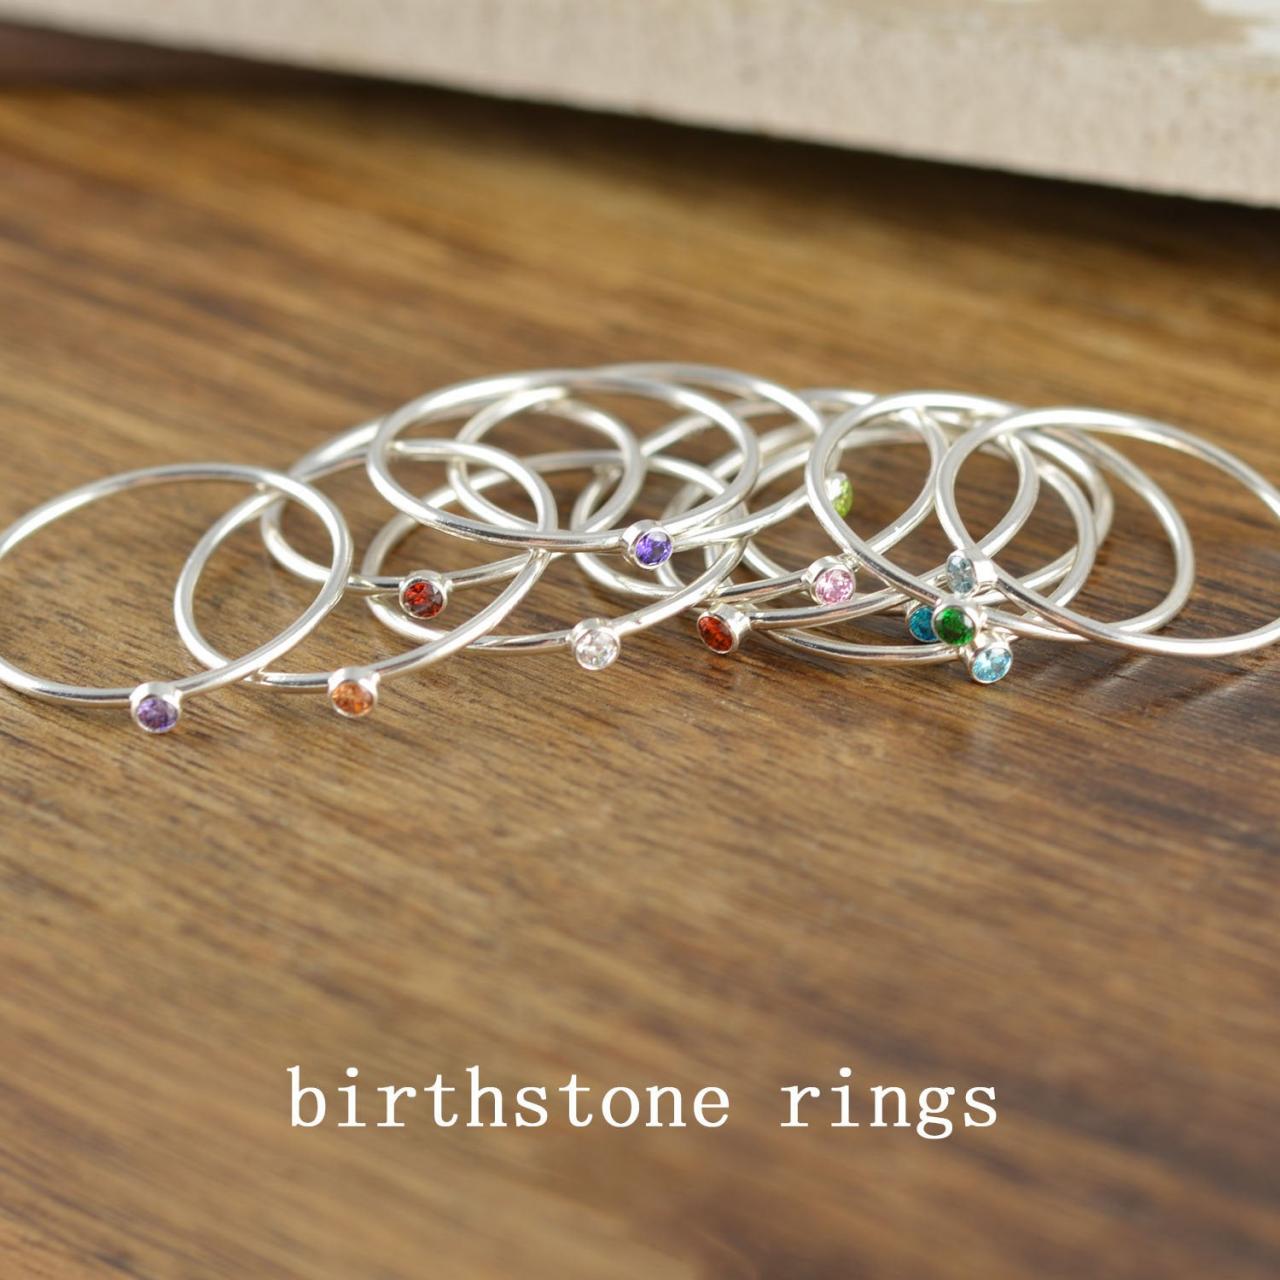 Birthstone Stacking Rings, Birthstone Ring, Birthstone Jewelry, Dainty Birthstone Ring, Minimal Ring, Stacking Ring, Gift for Her